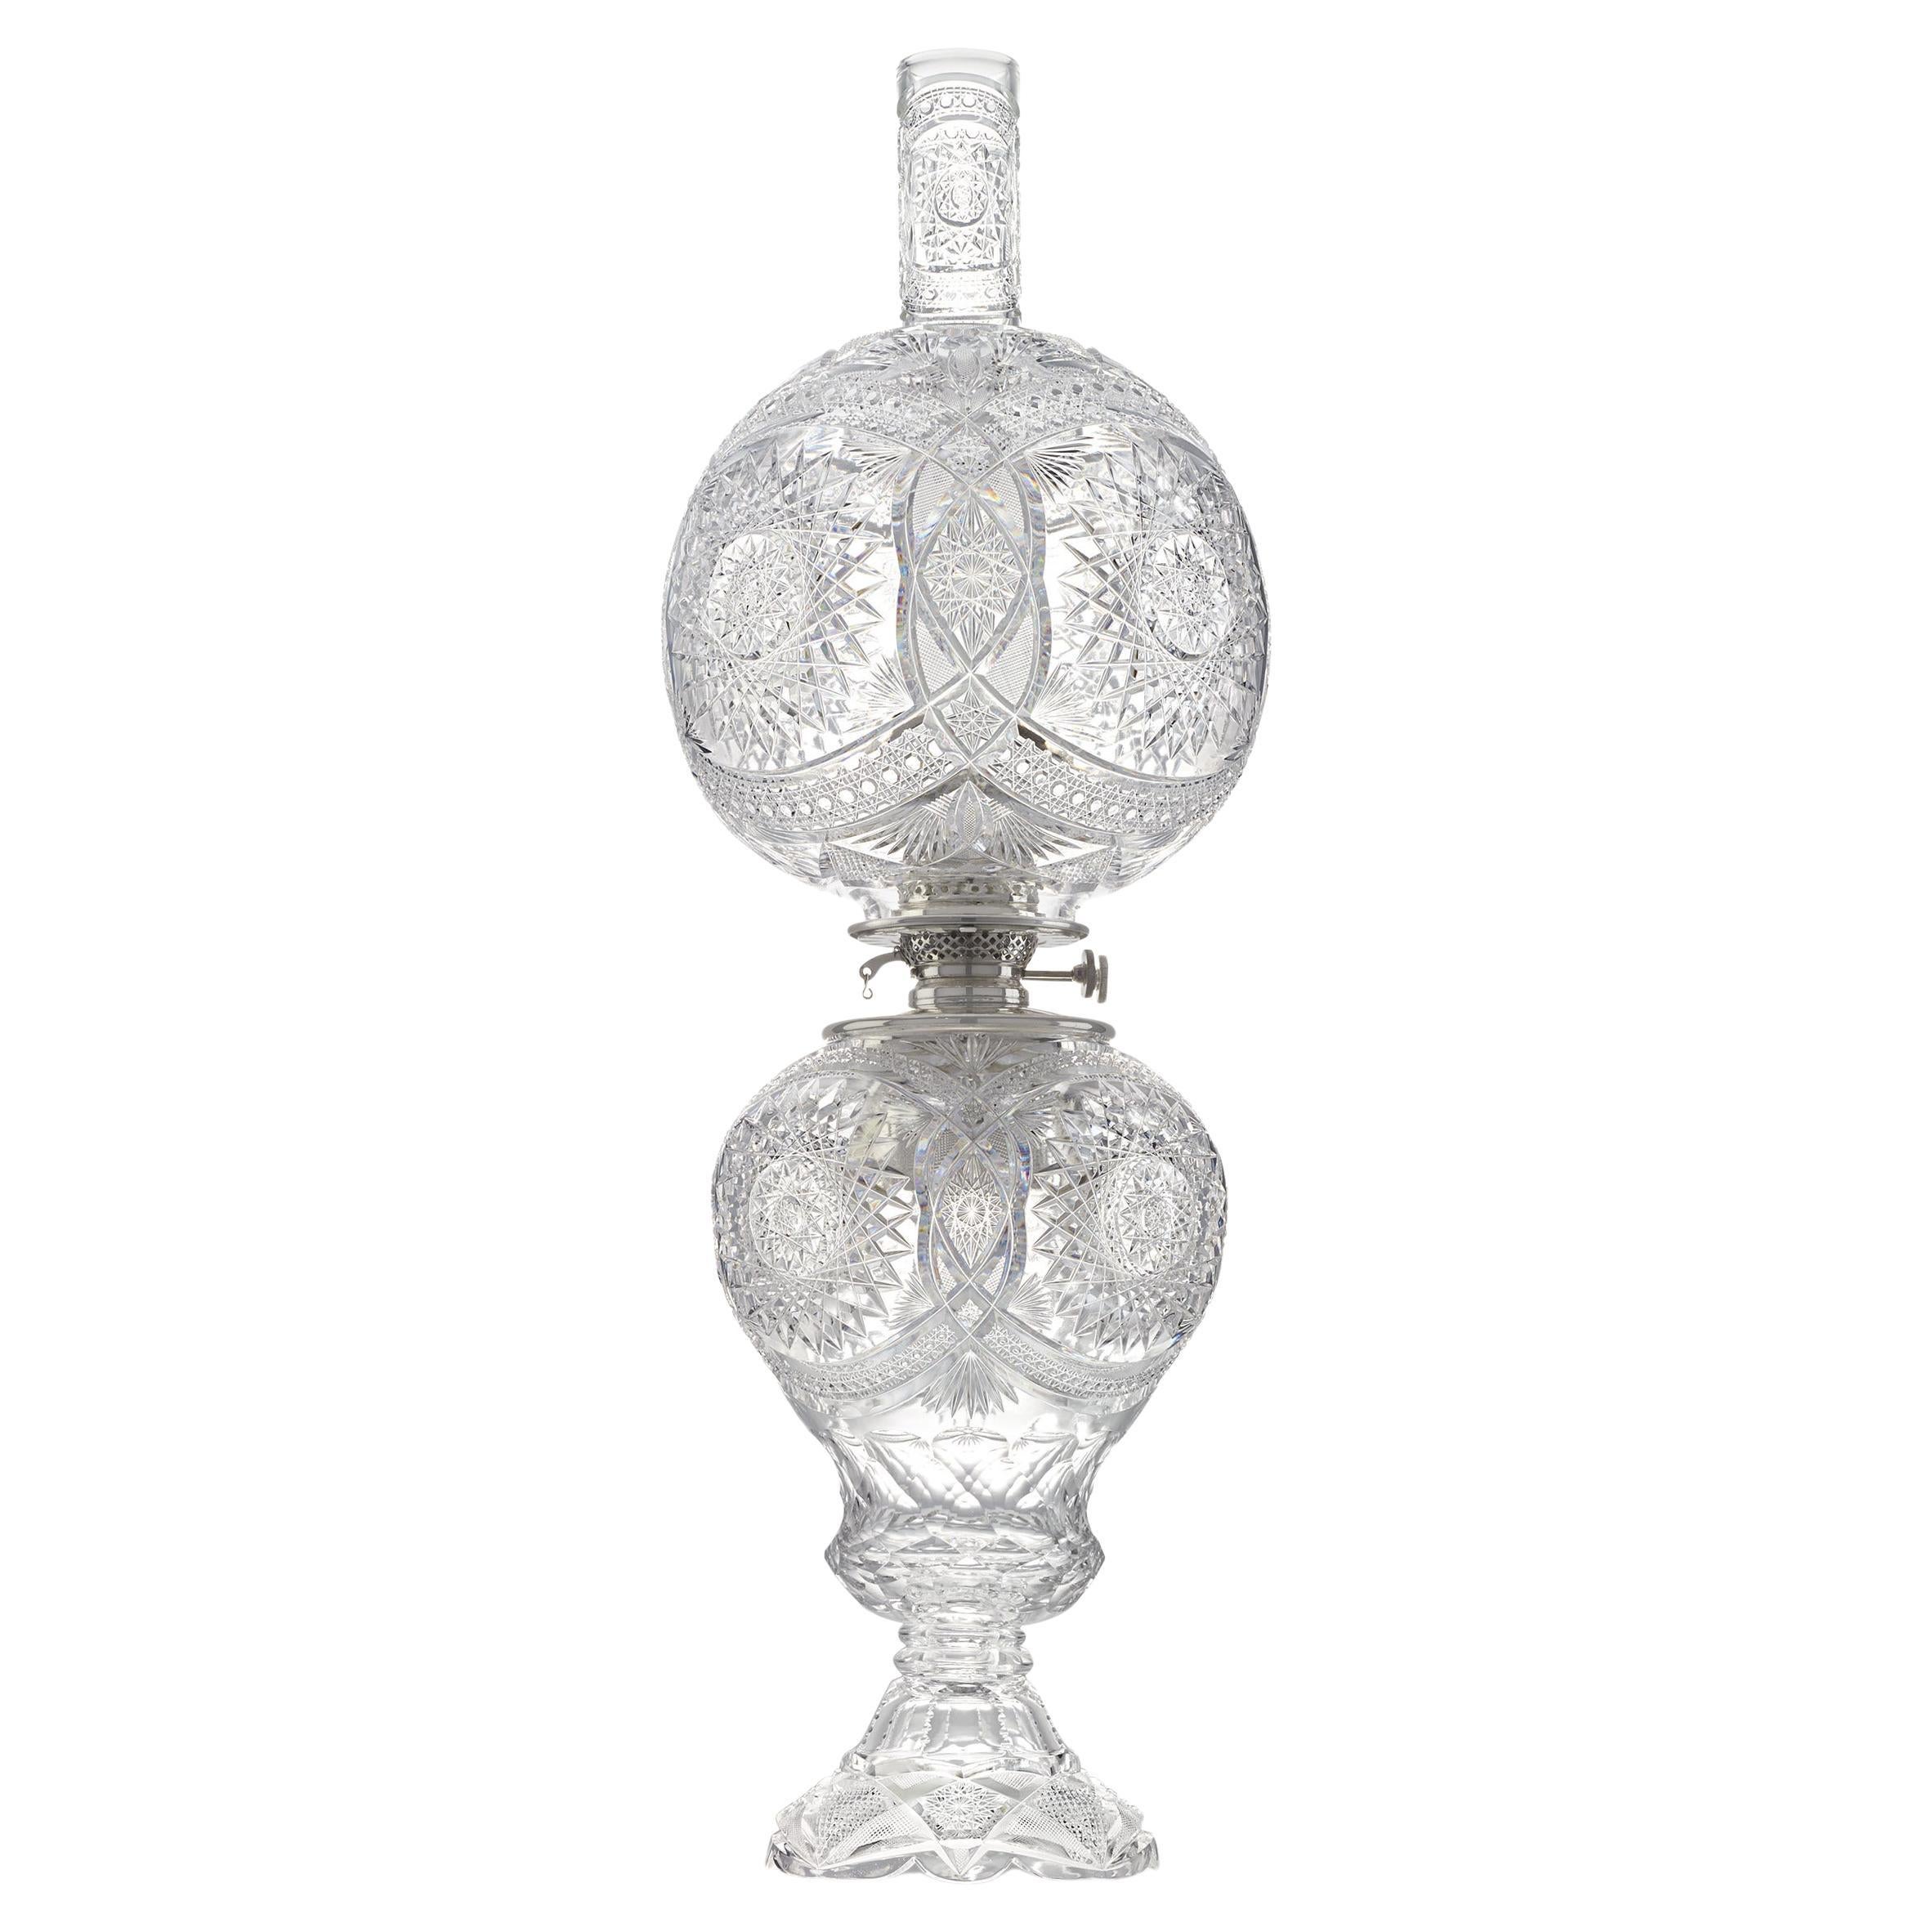 Gone With The Wind Cut Glass Lamp Attributed To Libbey